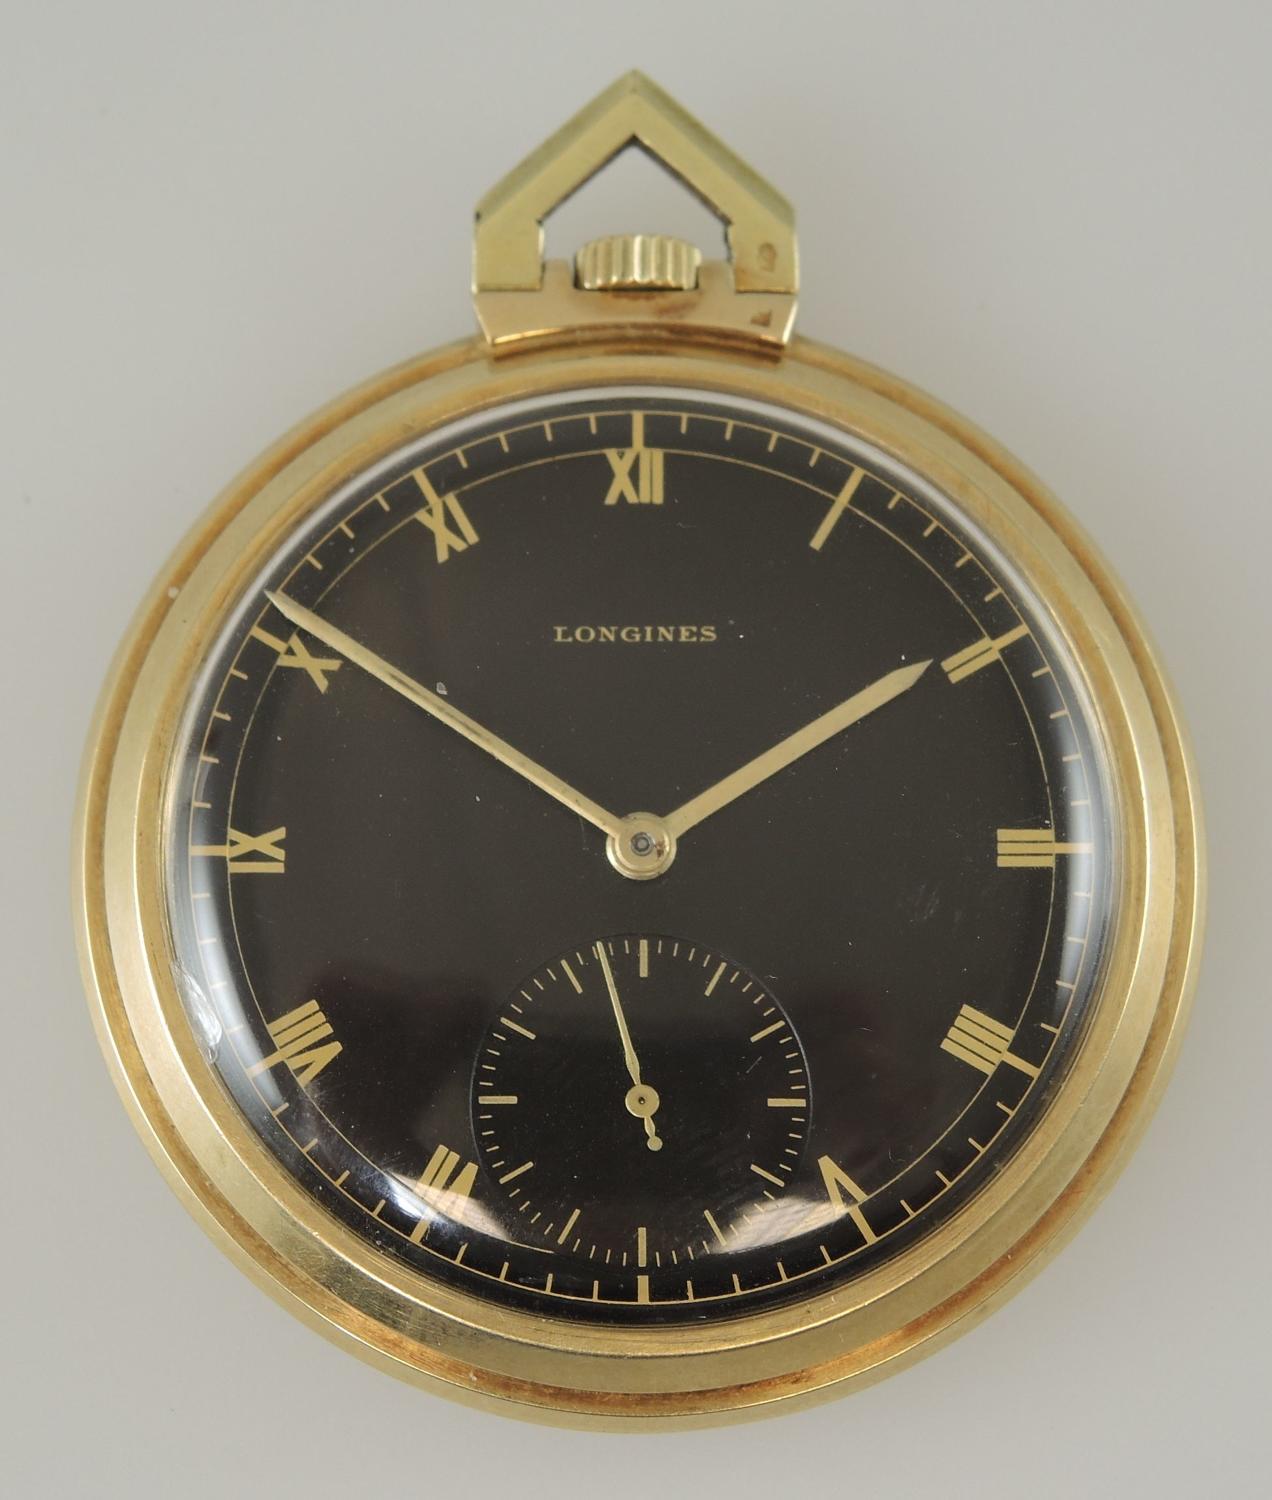 Solid 14K LONGINES pocket watch with Box c1936